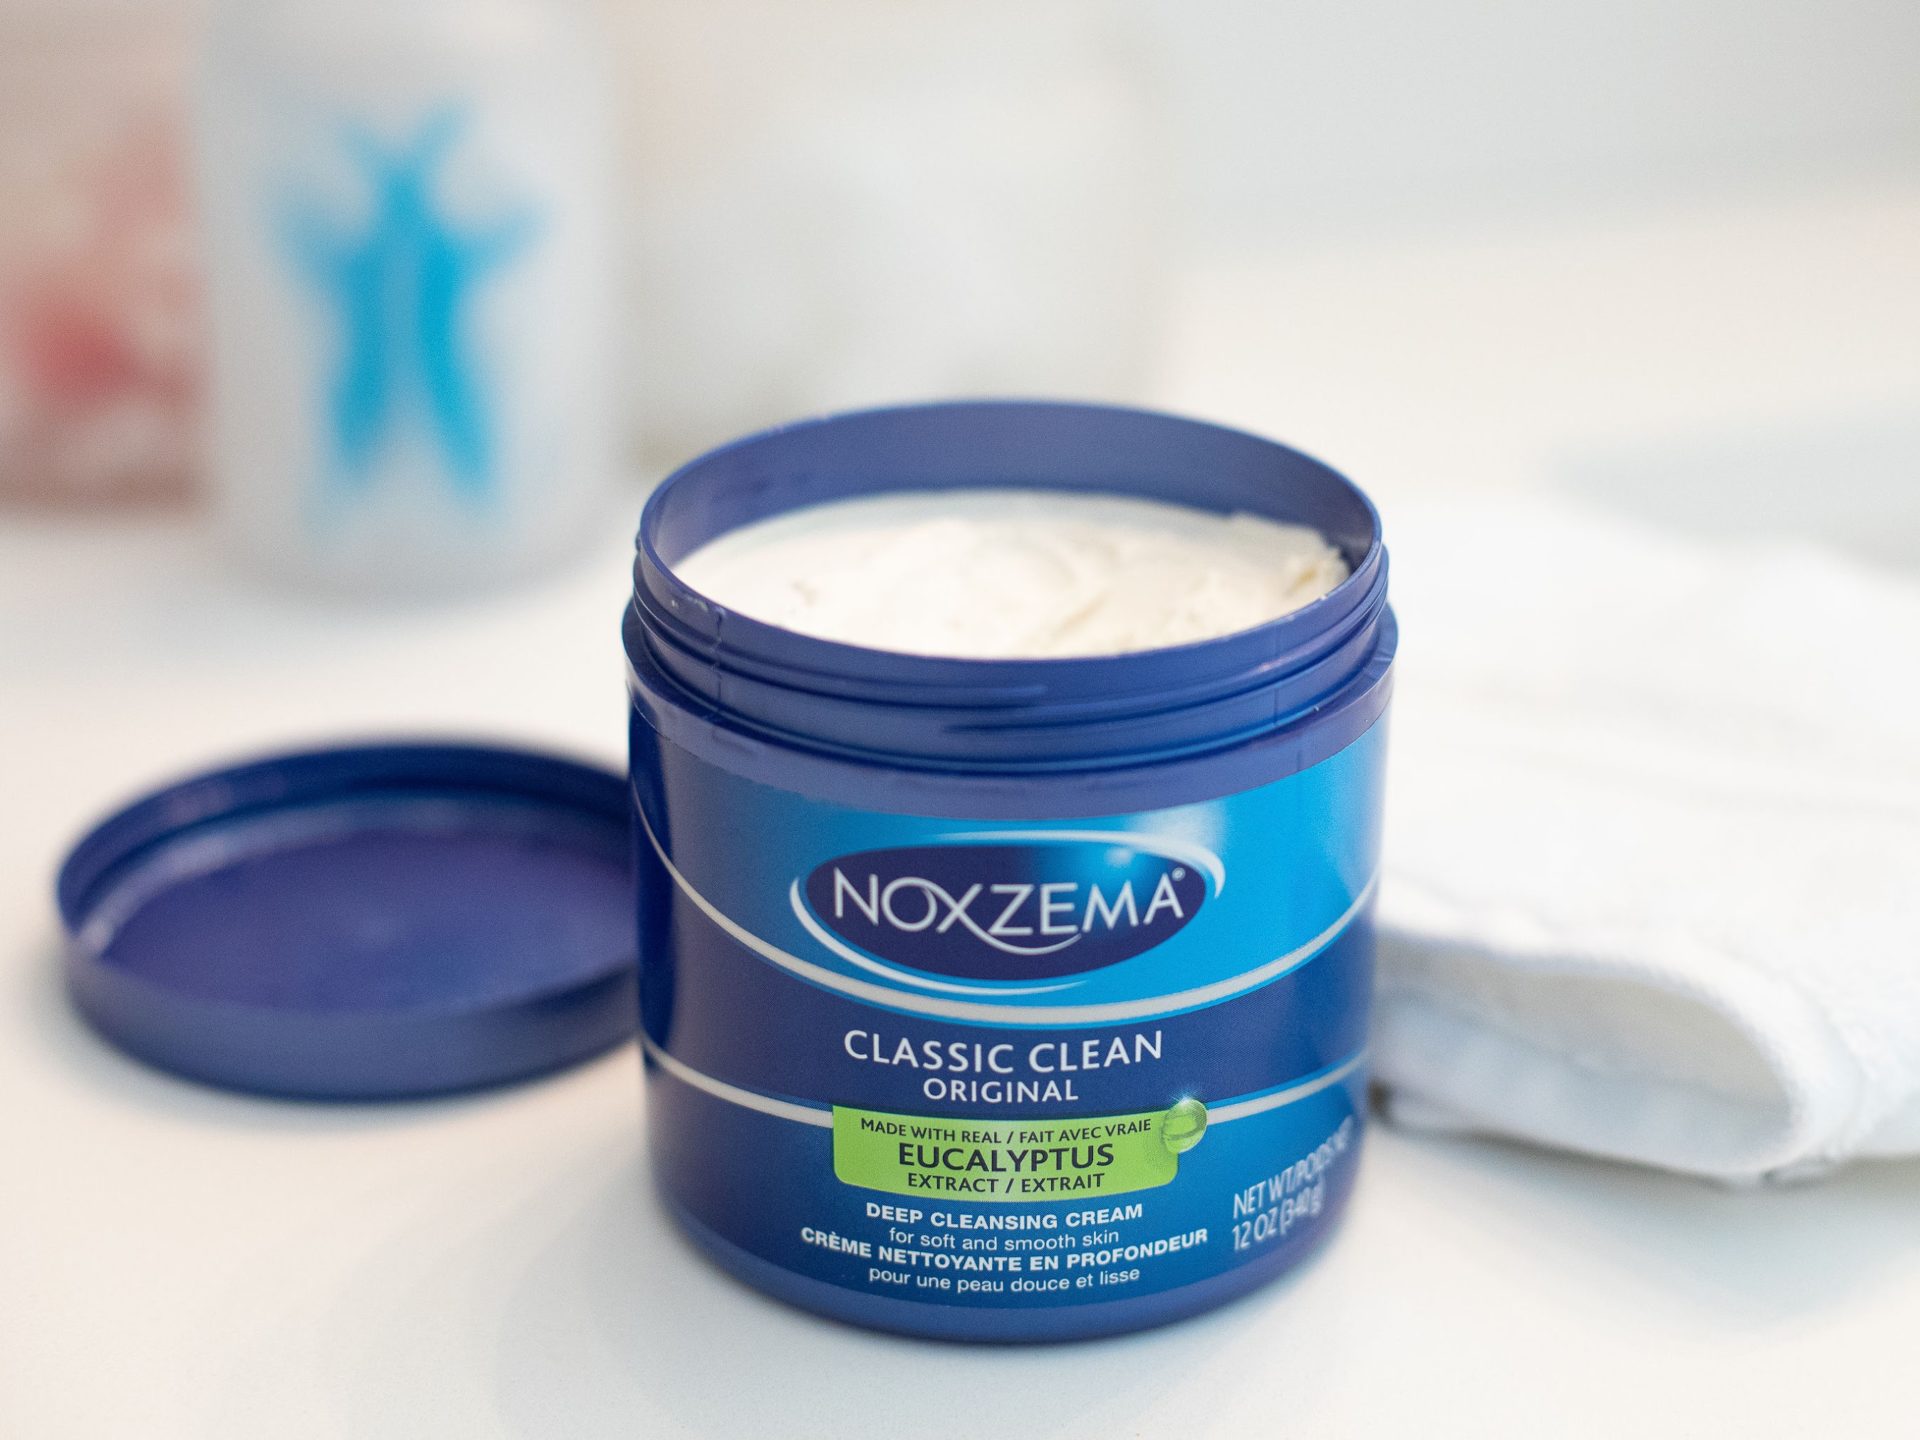 Noxzema Cleansing Cream As Low As $2.49 At Kroger